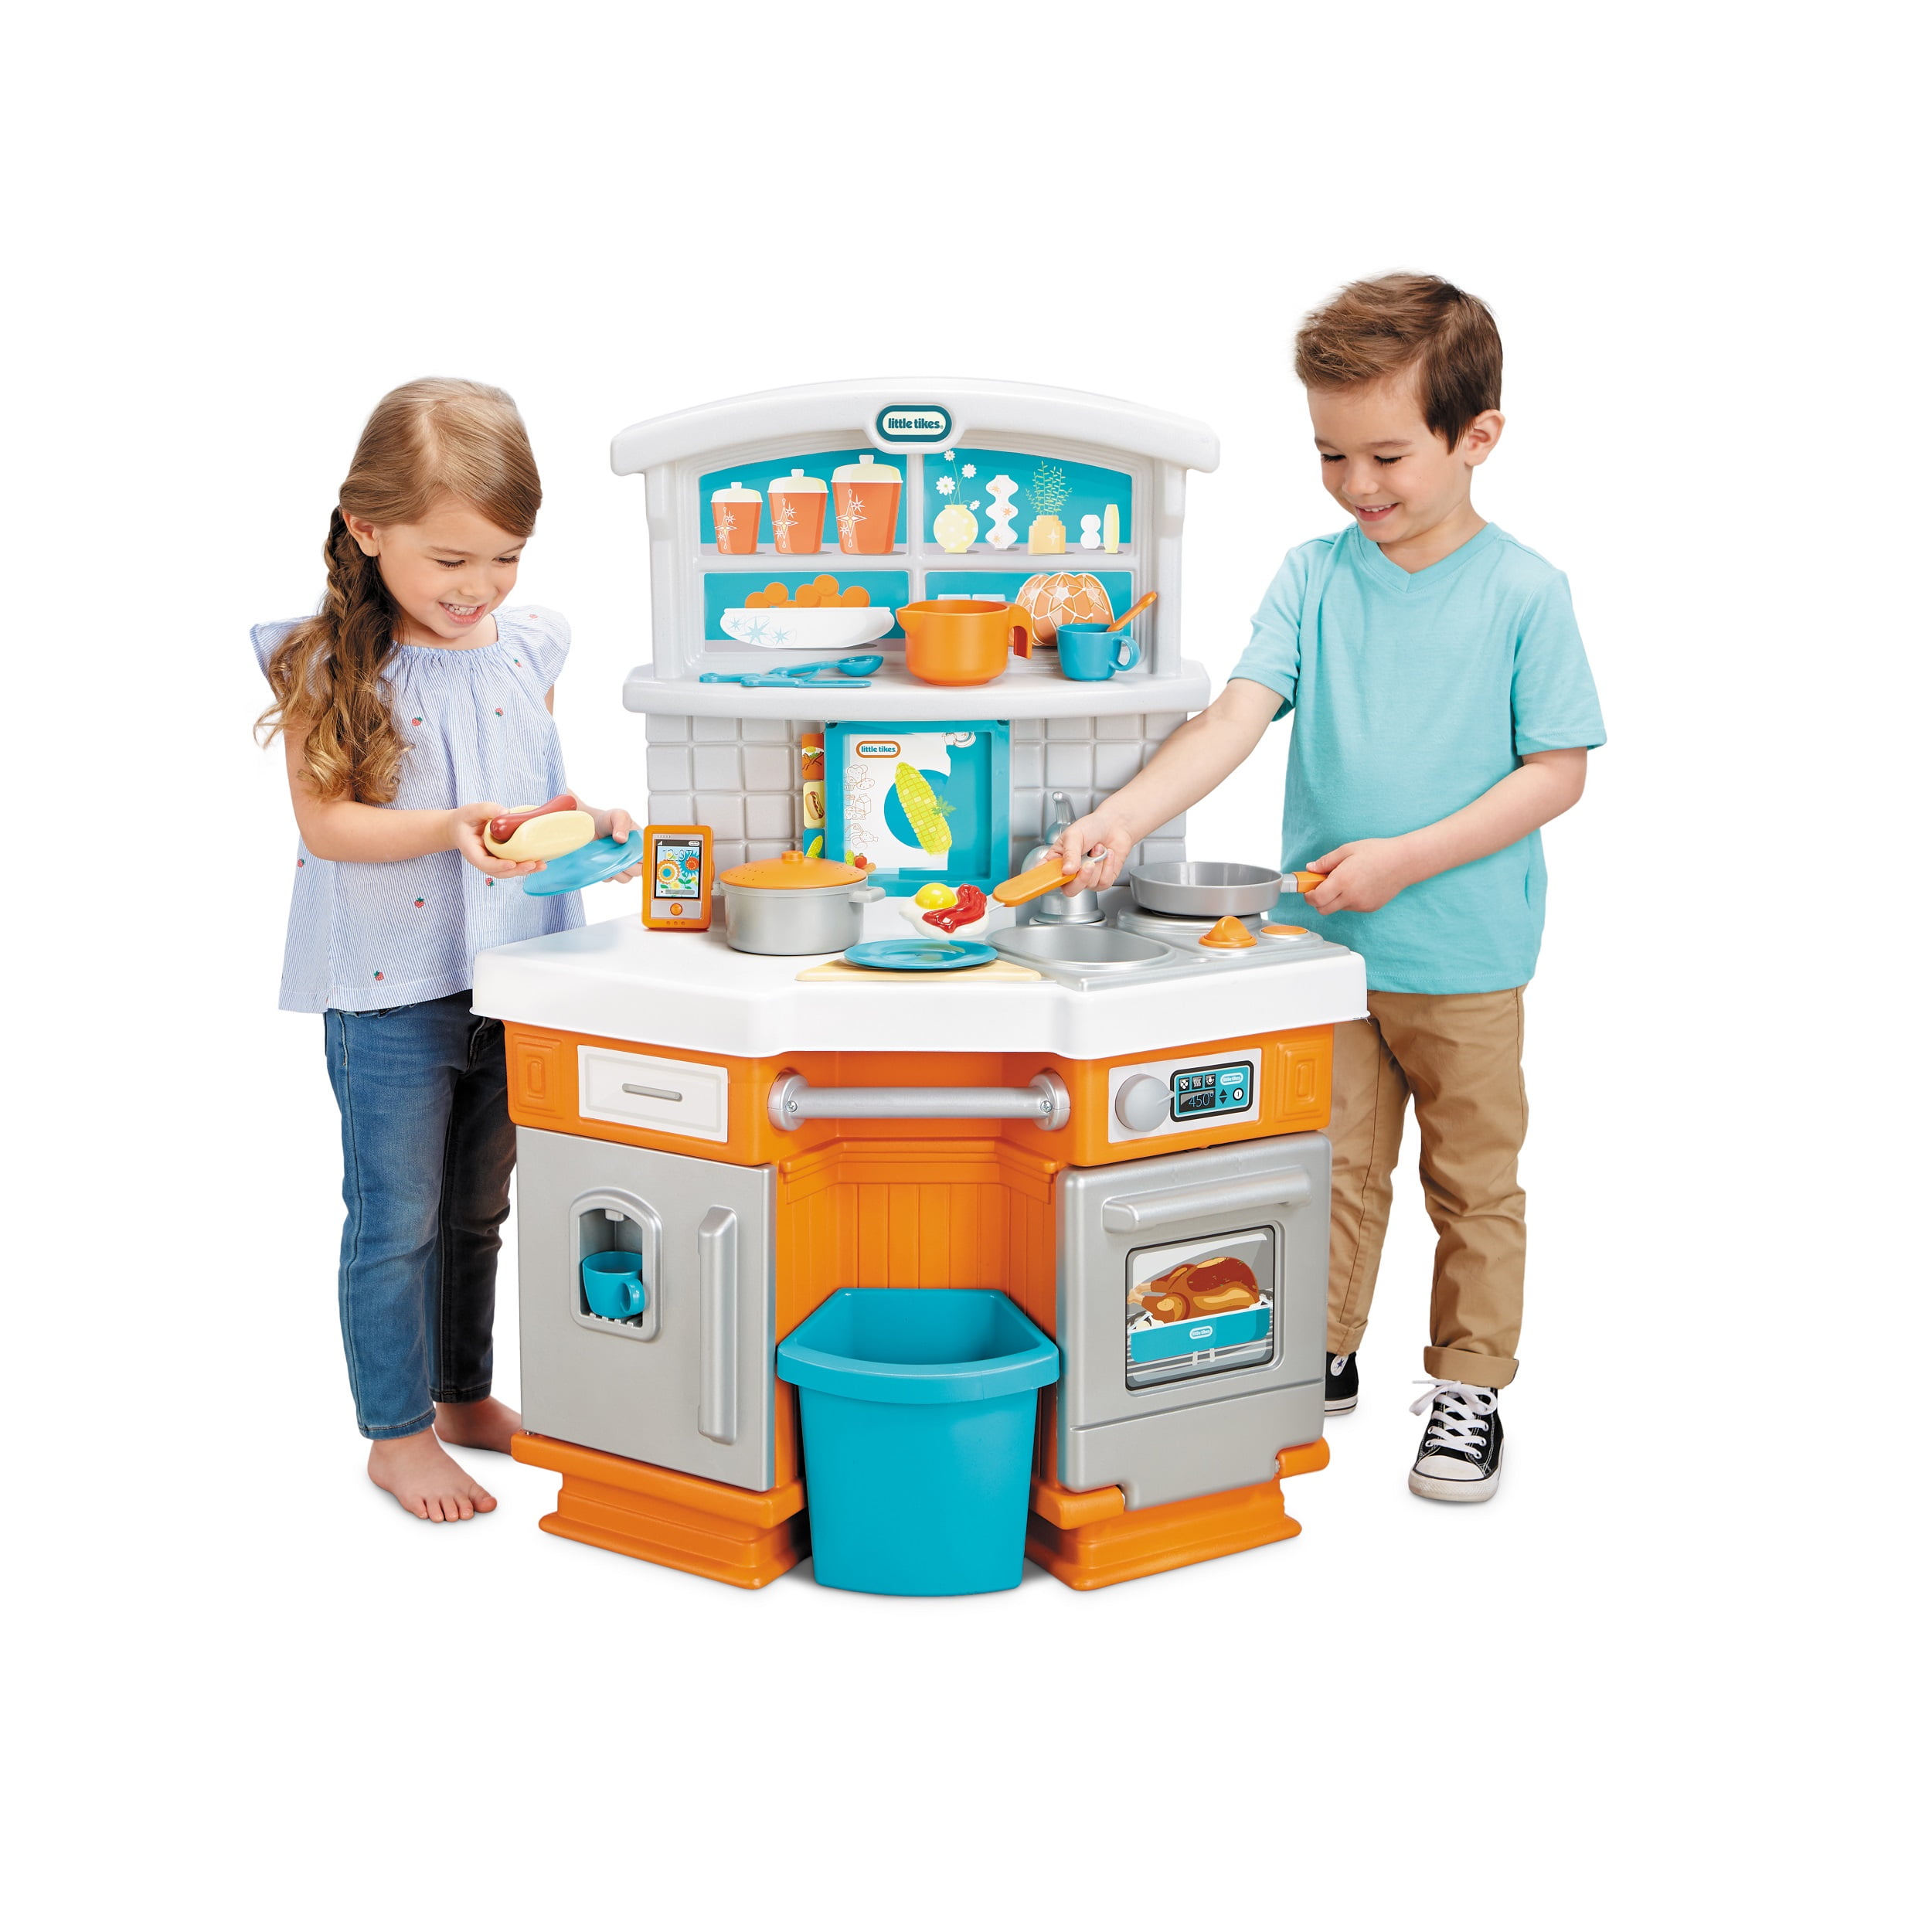 Girl Kids Plastic Kitchen Toy Toddler Role Play Cooking Kitchenware Playset Gift 